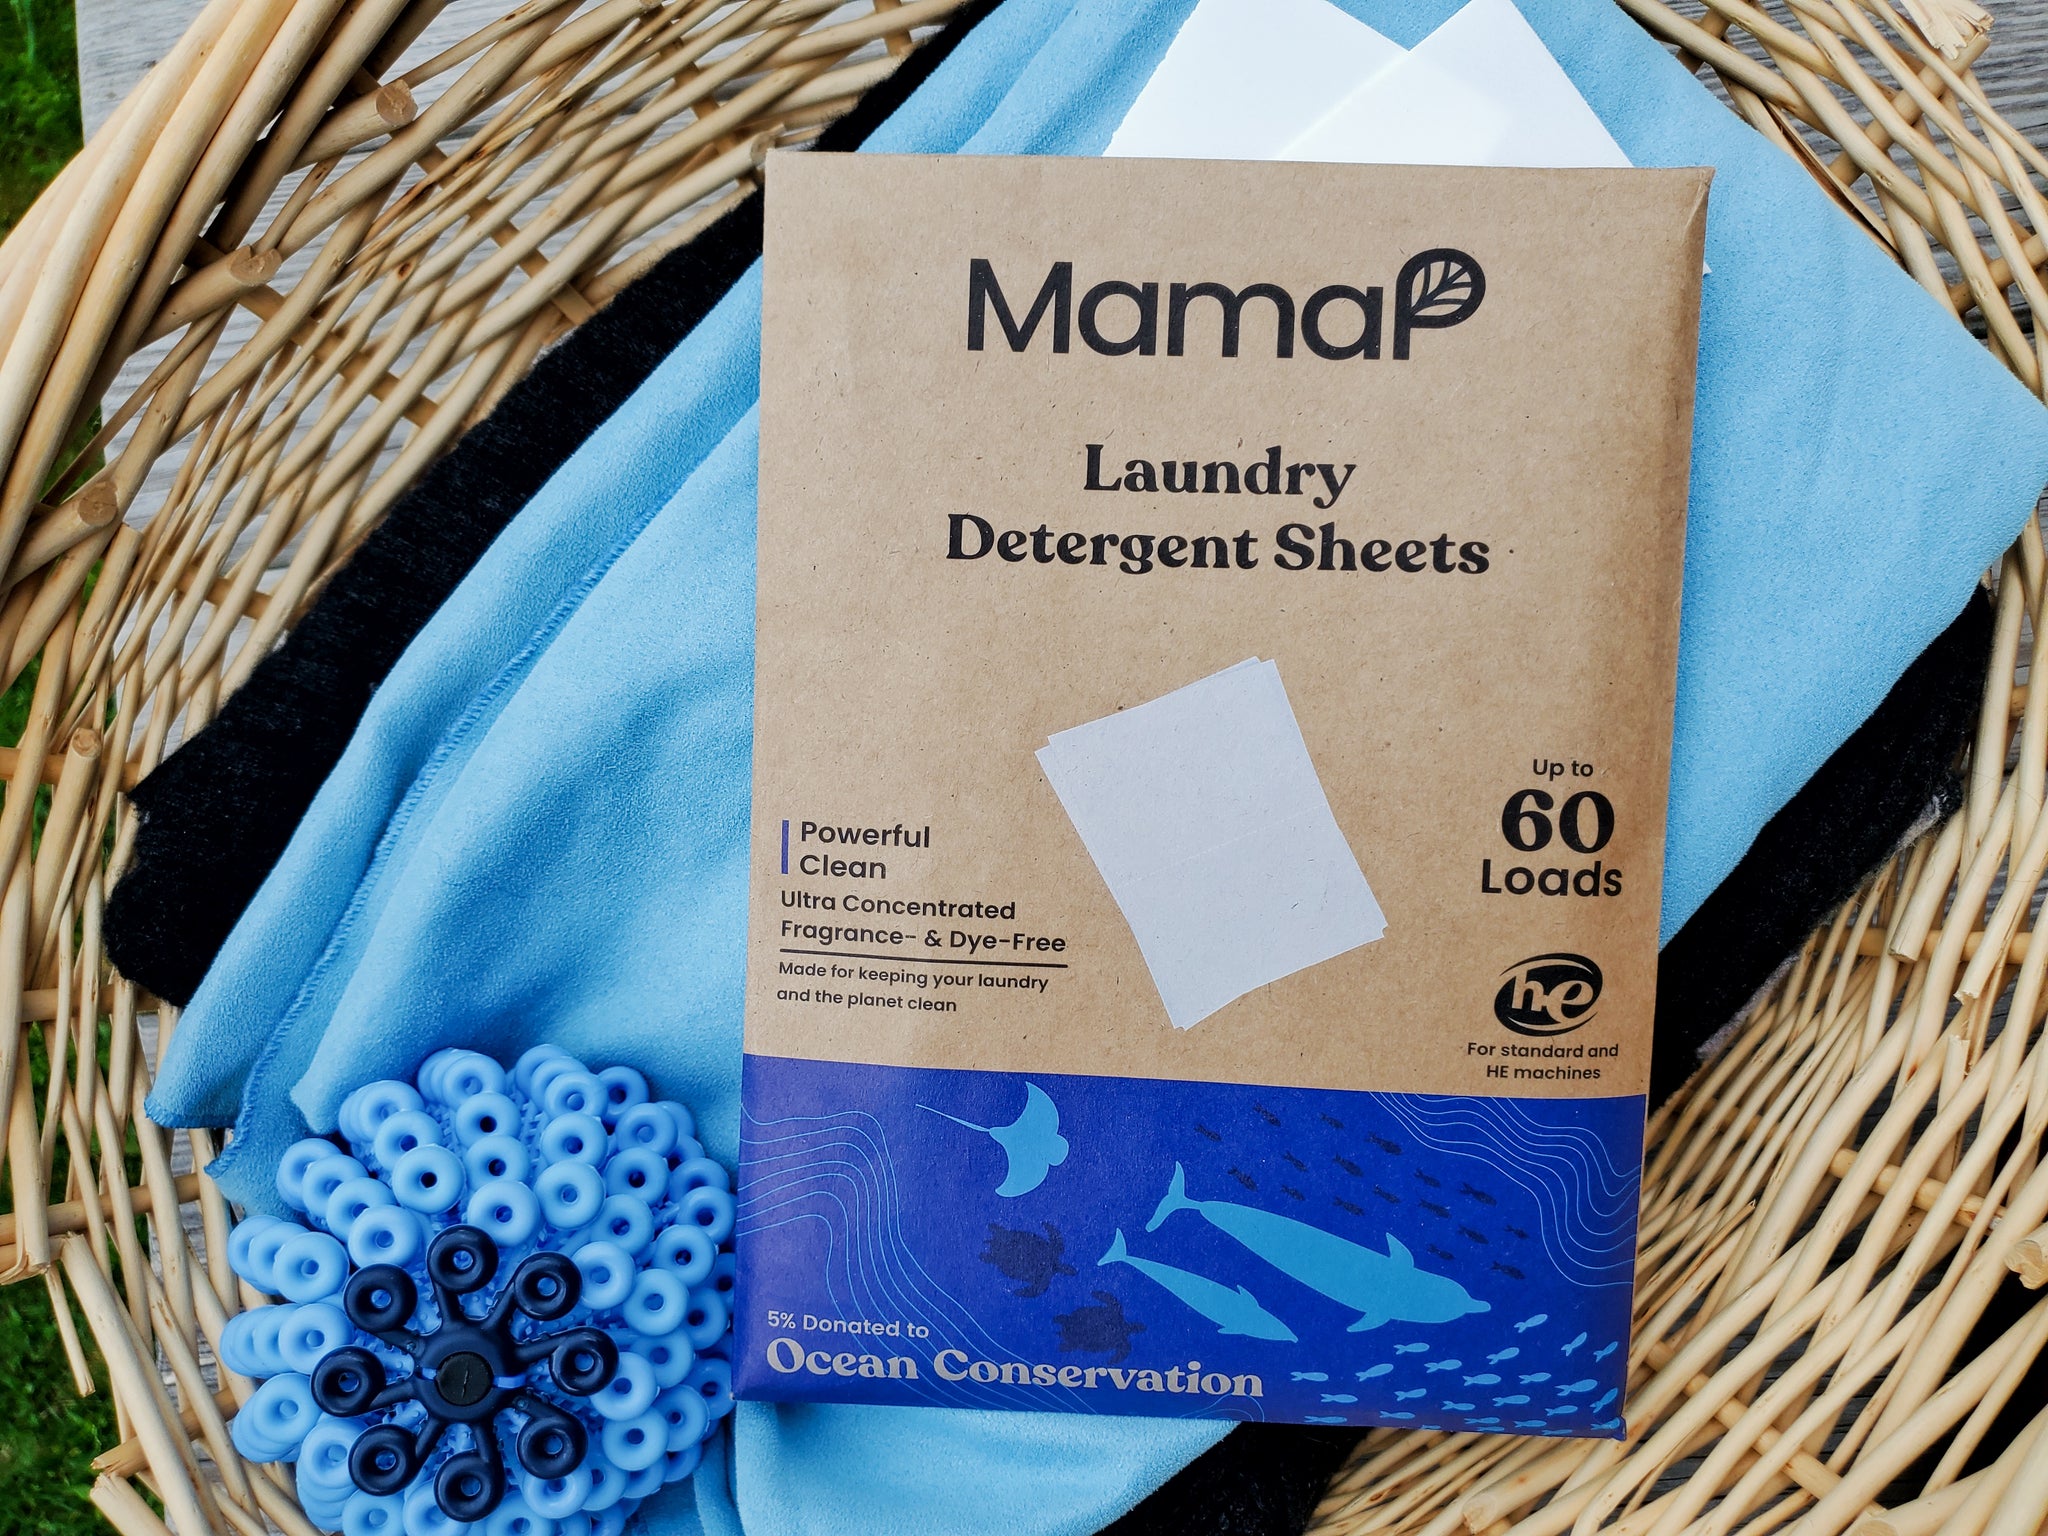 MamaP - Laundry Detergent Sheets – Cora Ball